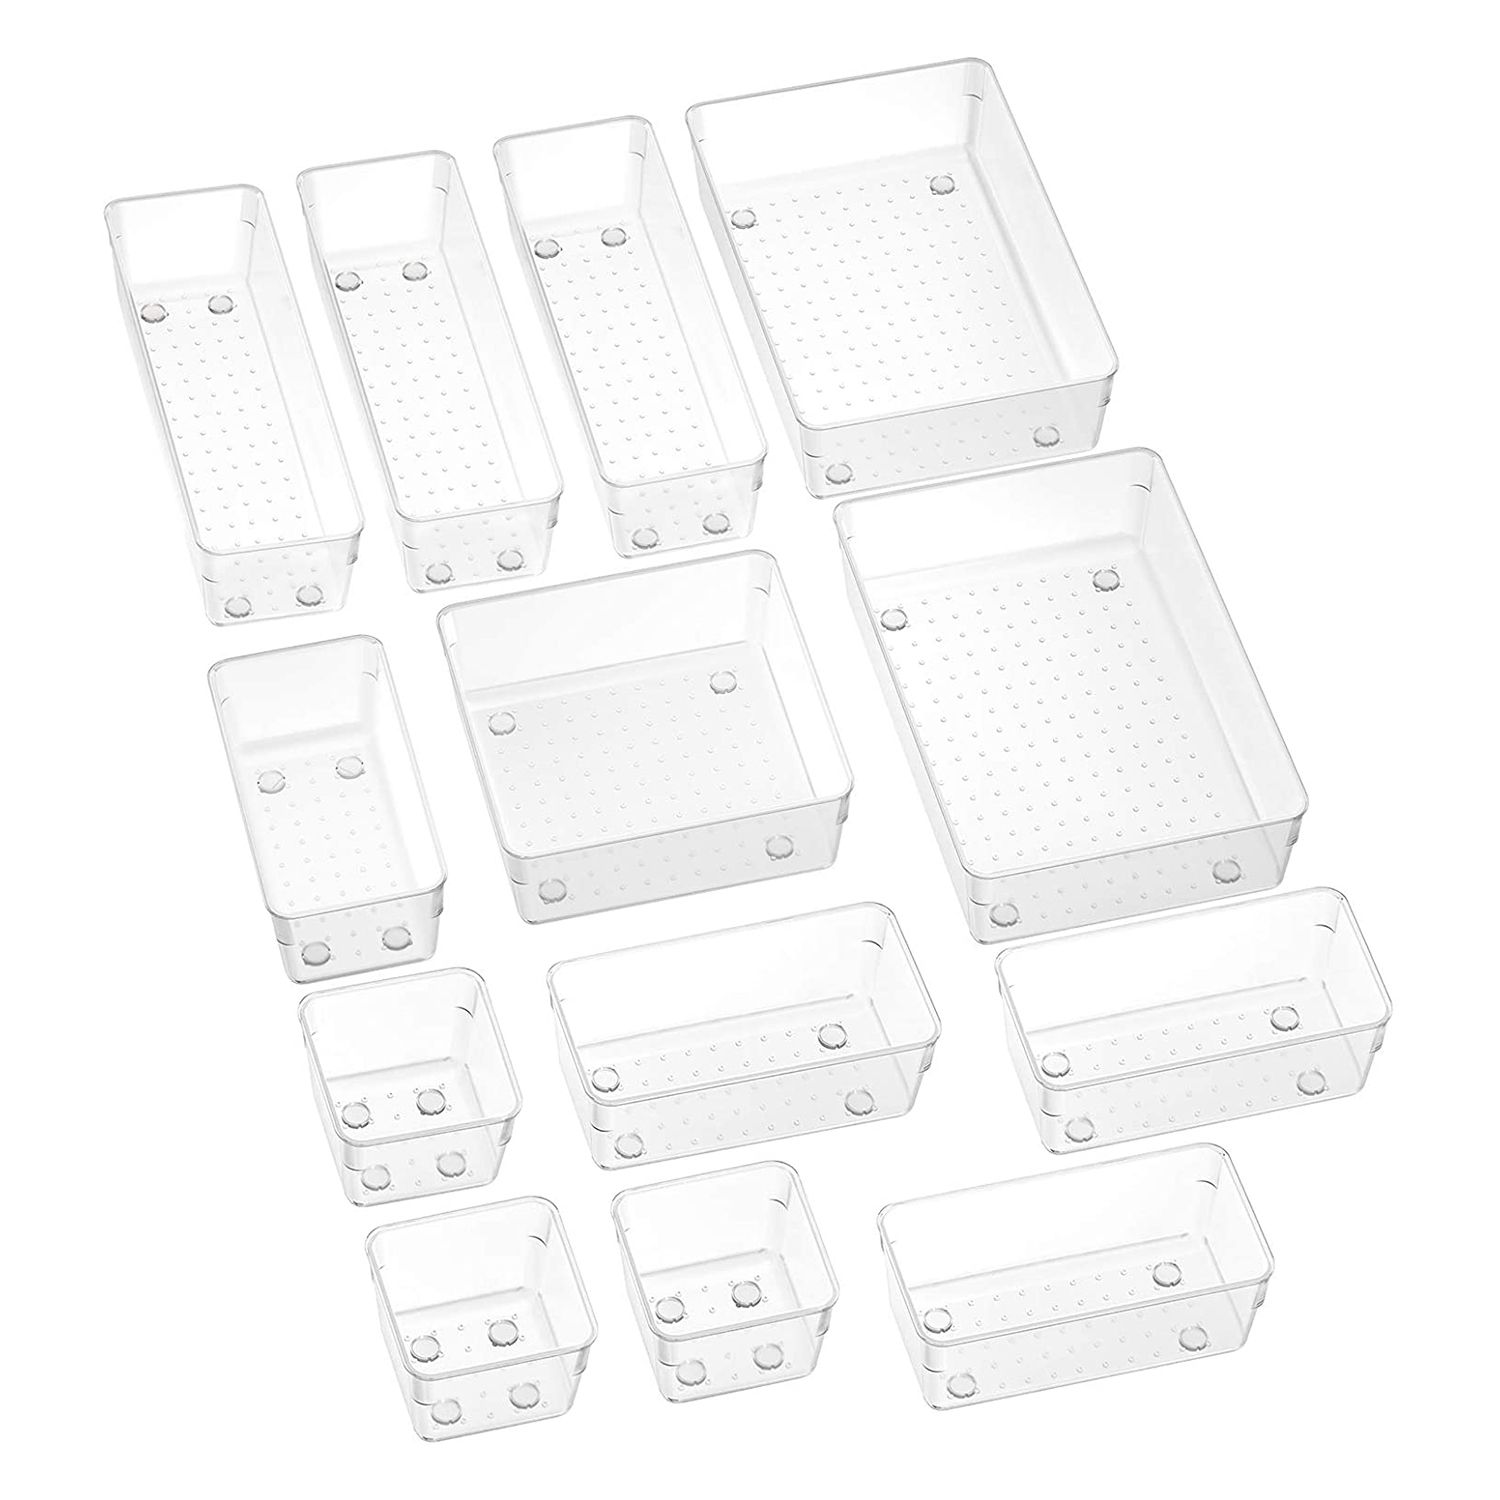 Office and Kitchen 2-Size Clear Desk Drawer Organizer Trays Storage Tray with Non-Slip Silicone Pads for Makeup Jewelries Utensils in Bedroom Dresser SMARTAKE 6-Piece Drawer Organizer